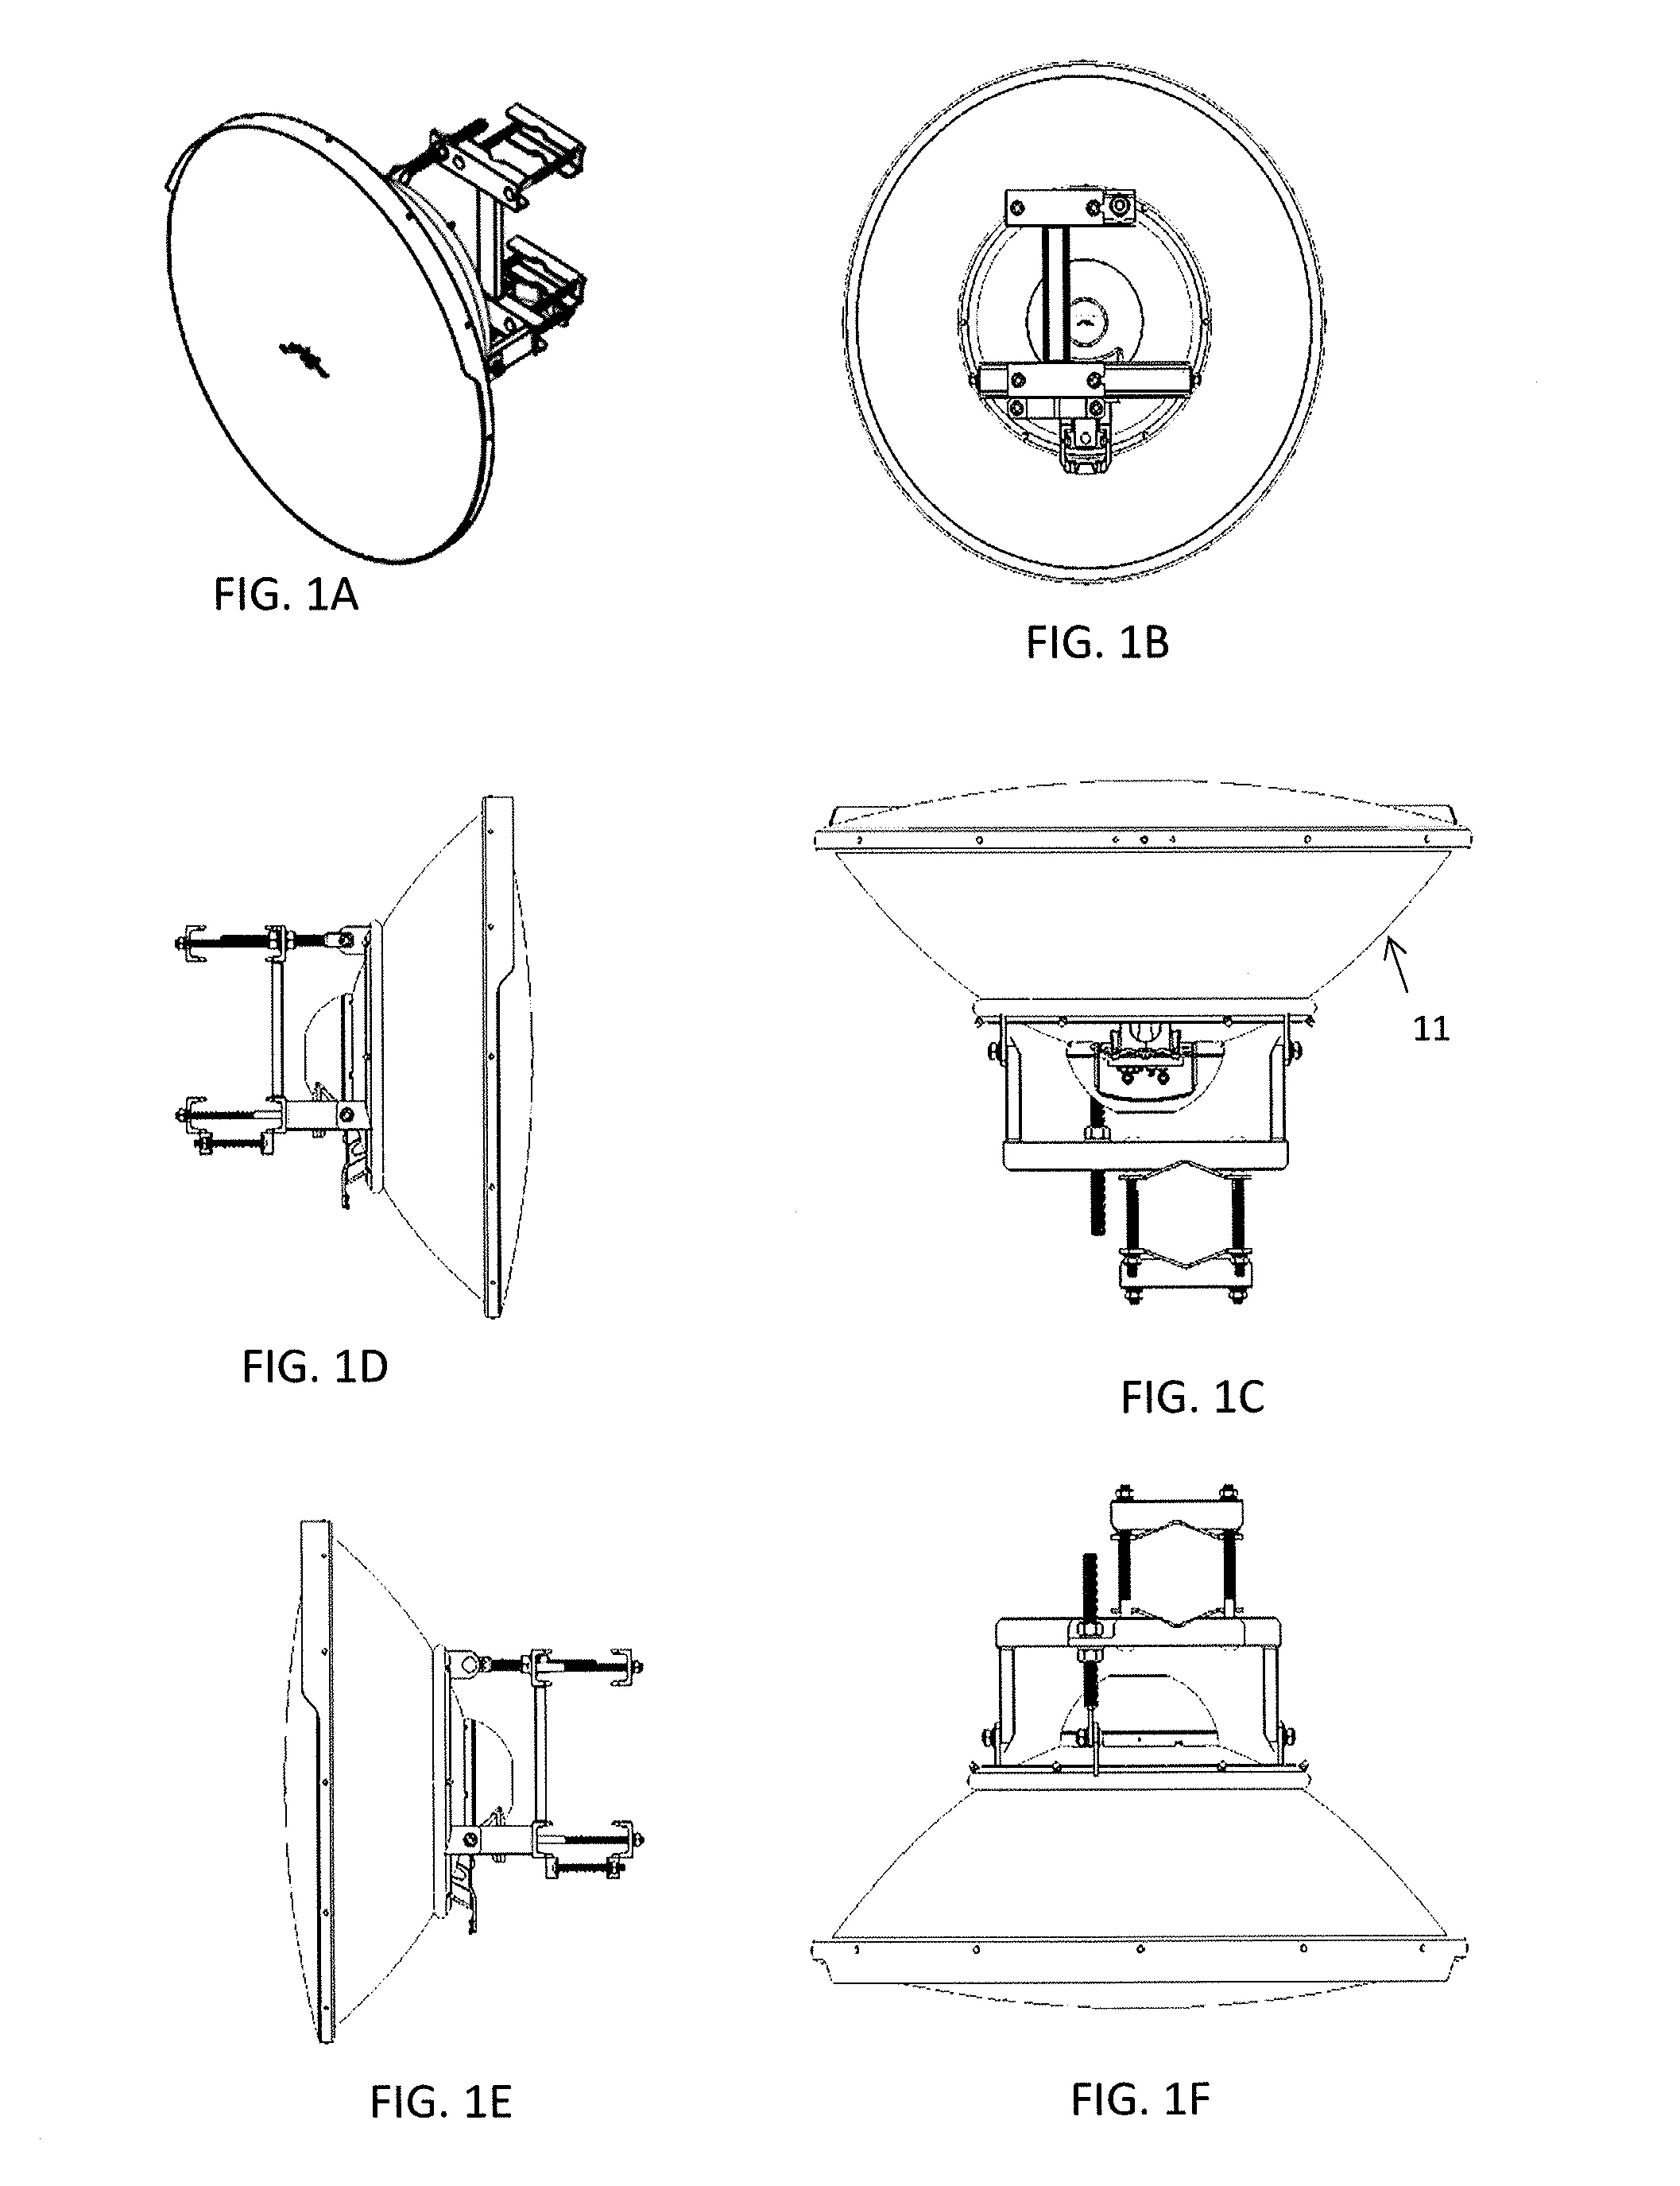 Compact radio frequency antenna apparatuses